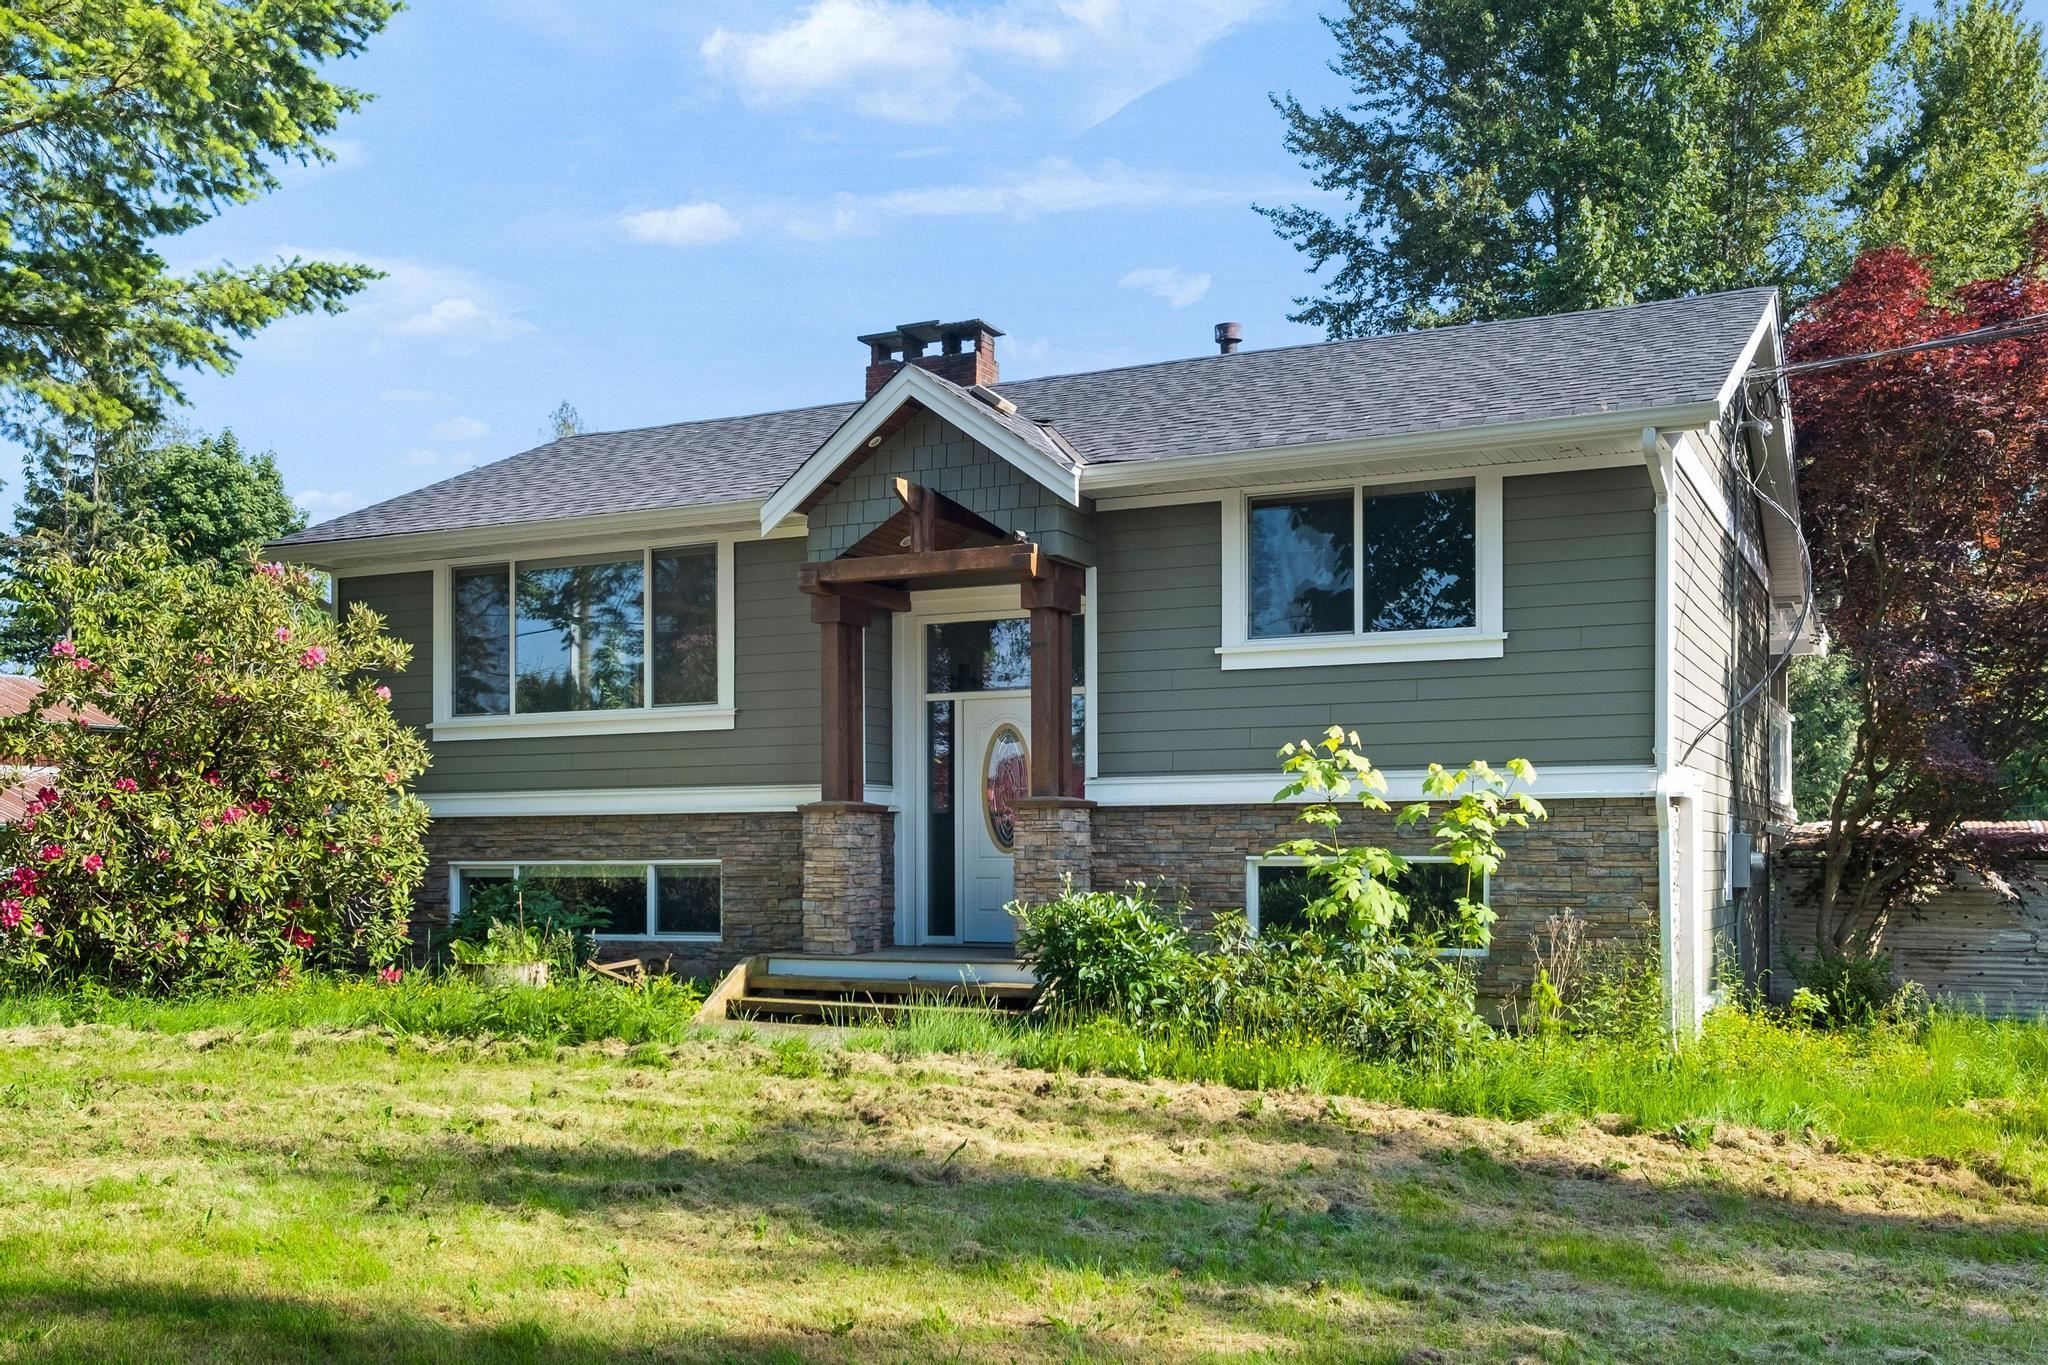 New property listed in Otter District, Langley